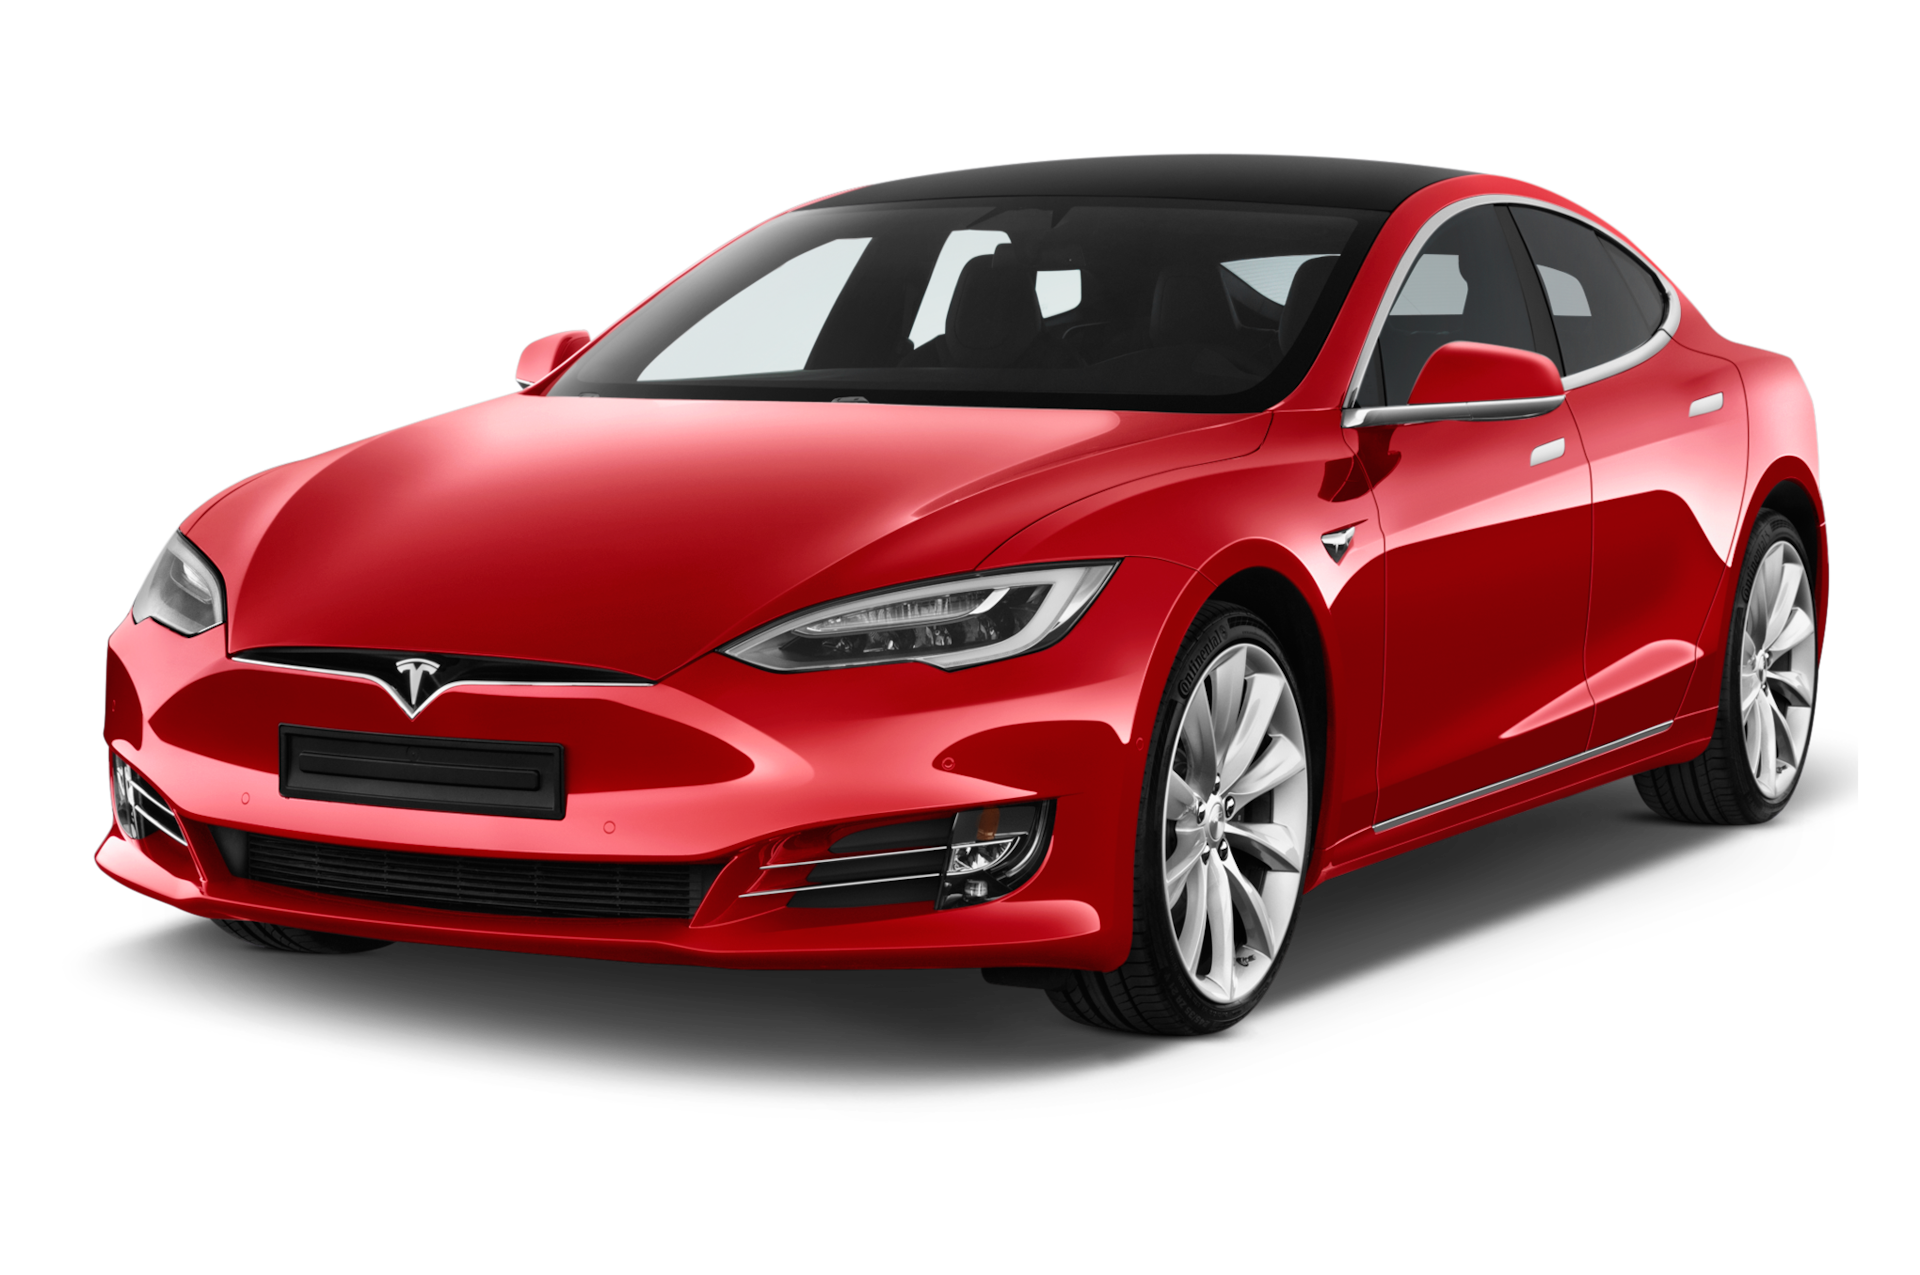 2019 Tesla Model S Prices, Reviews, and Photos - MotorTrend